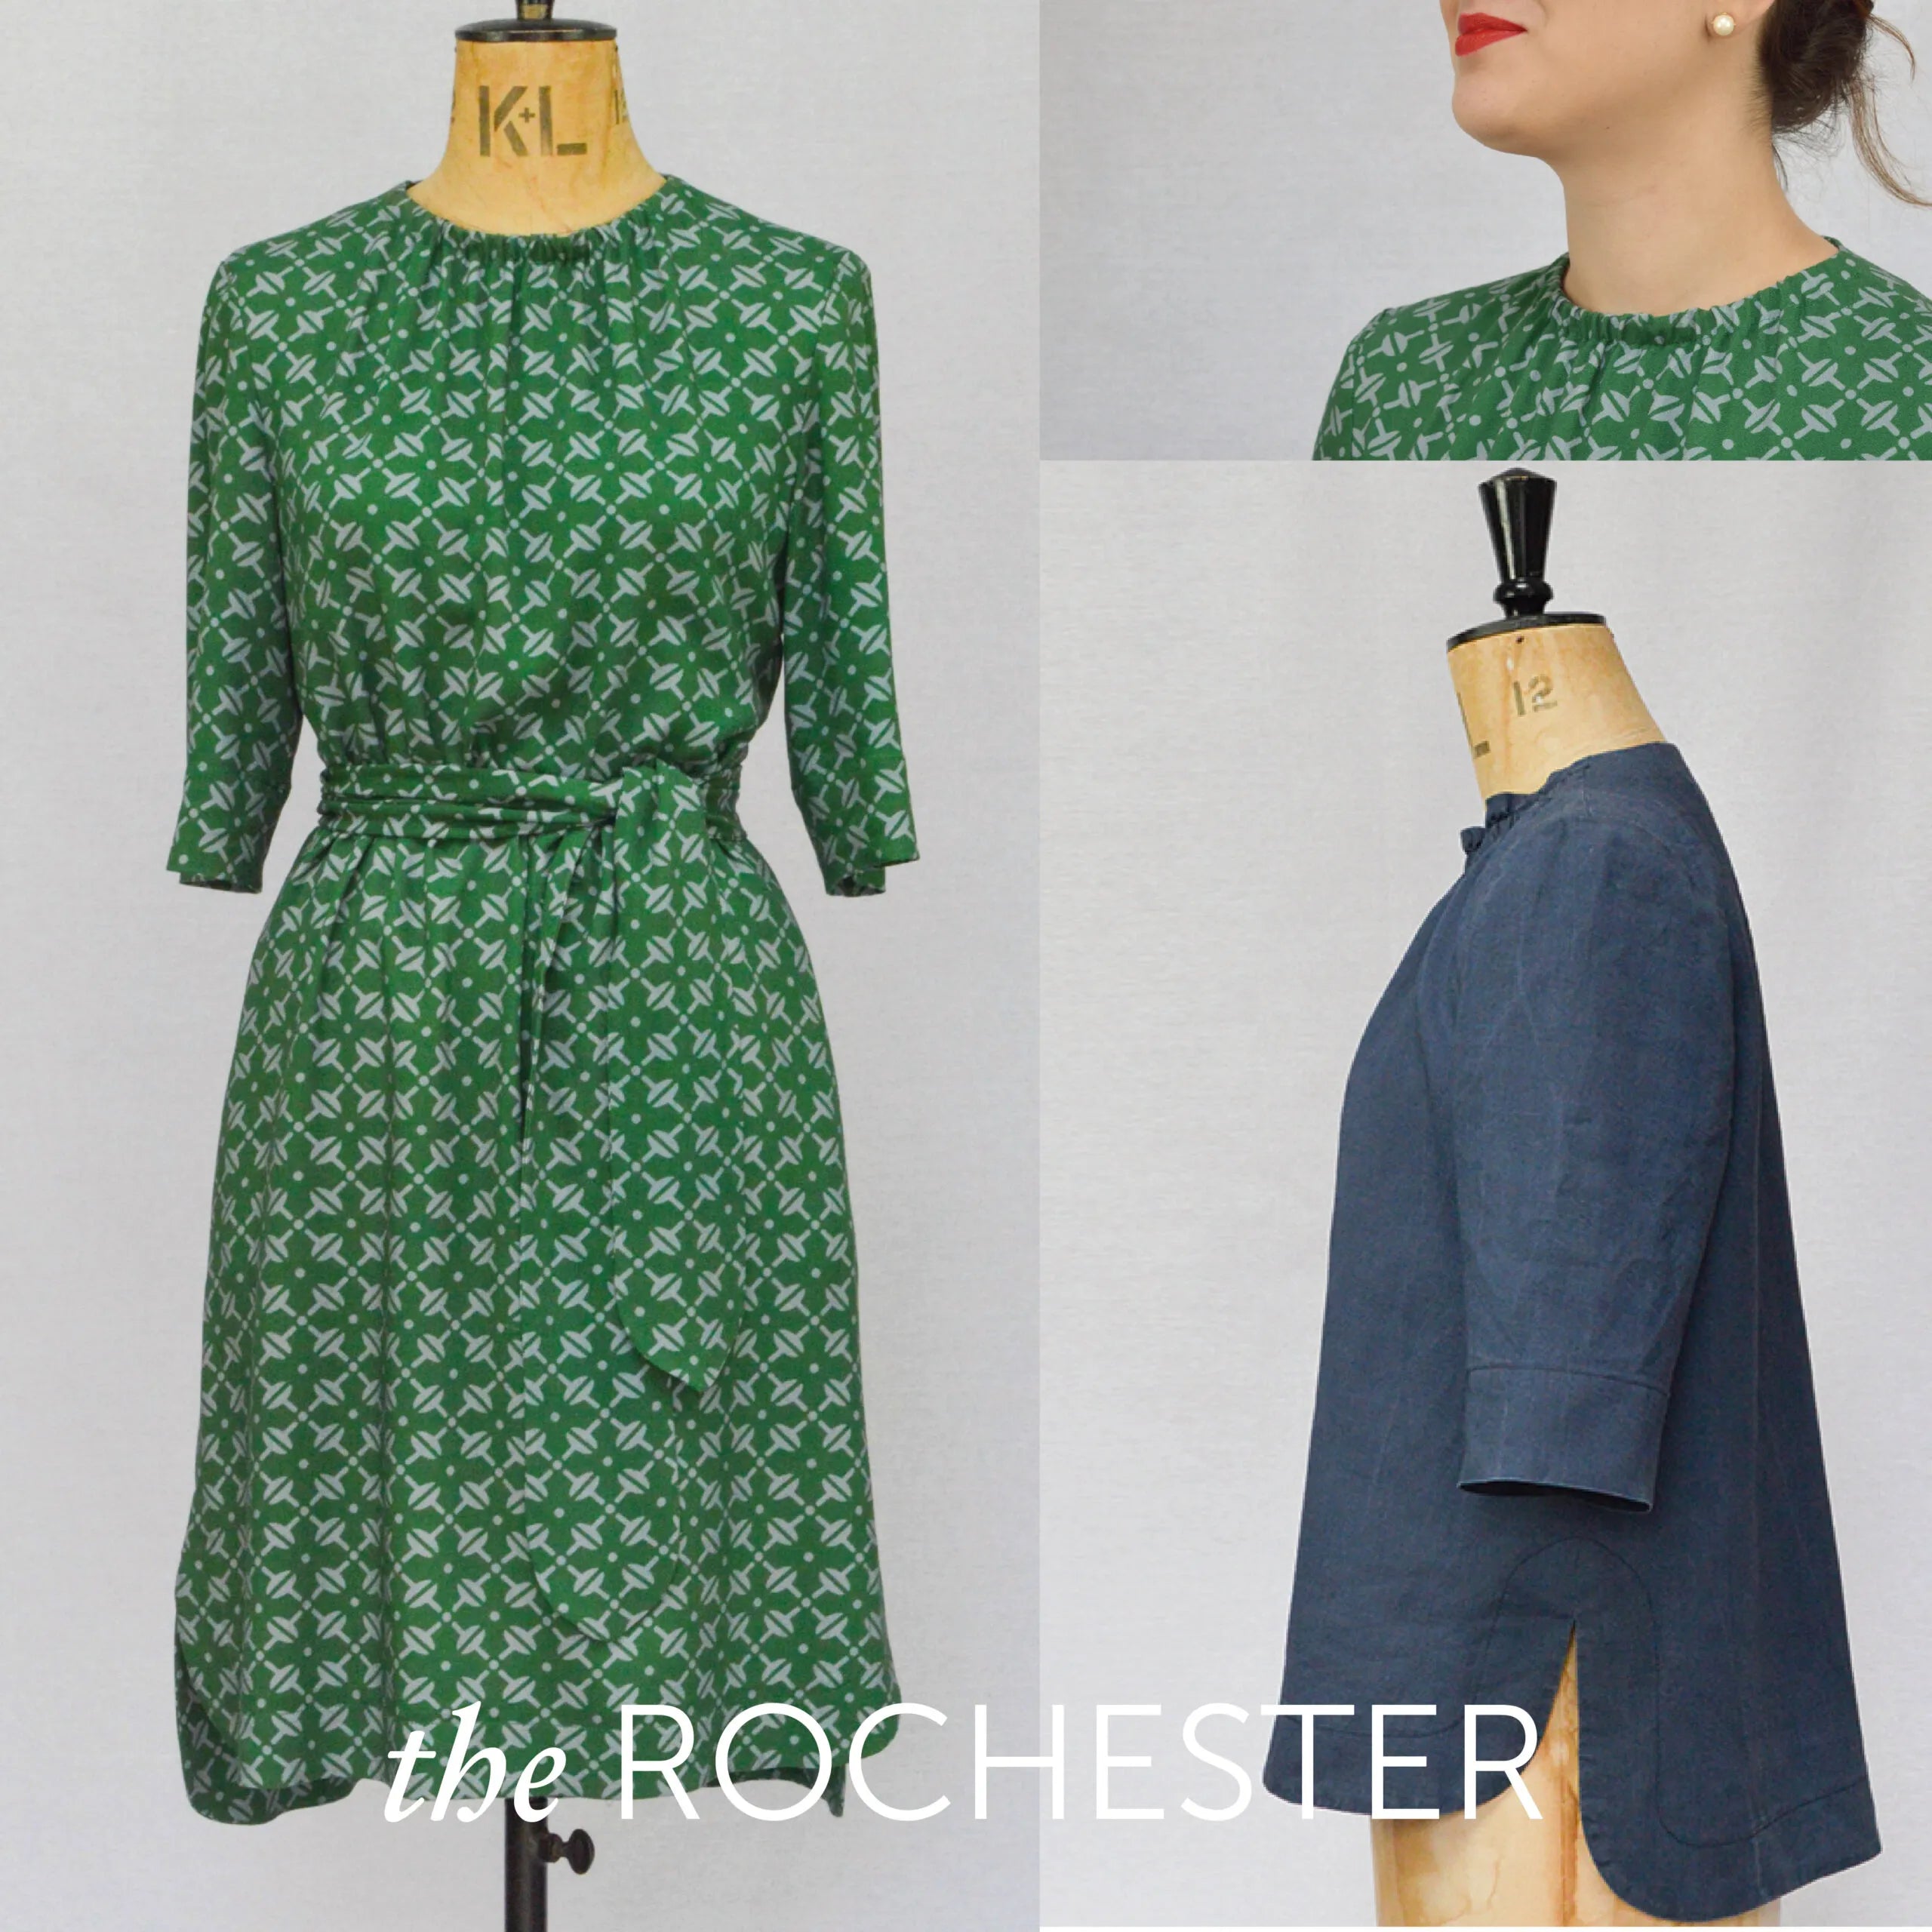 Maven Patterns Rochester Dress and Top